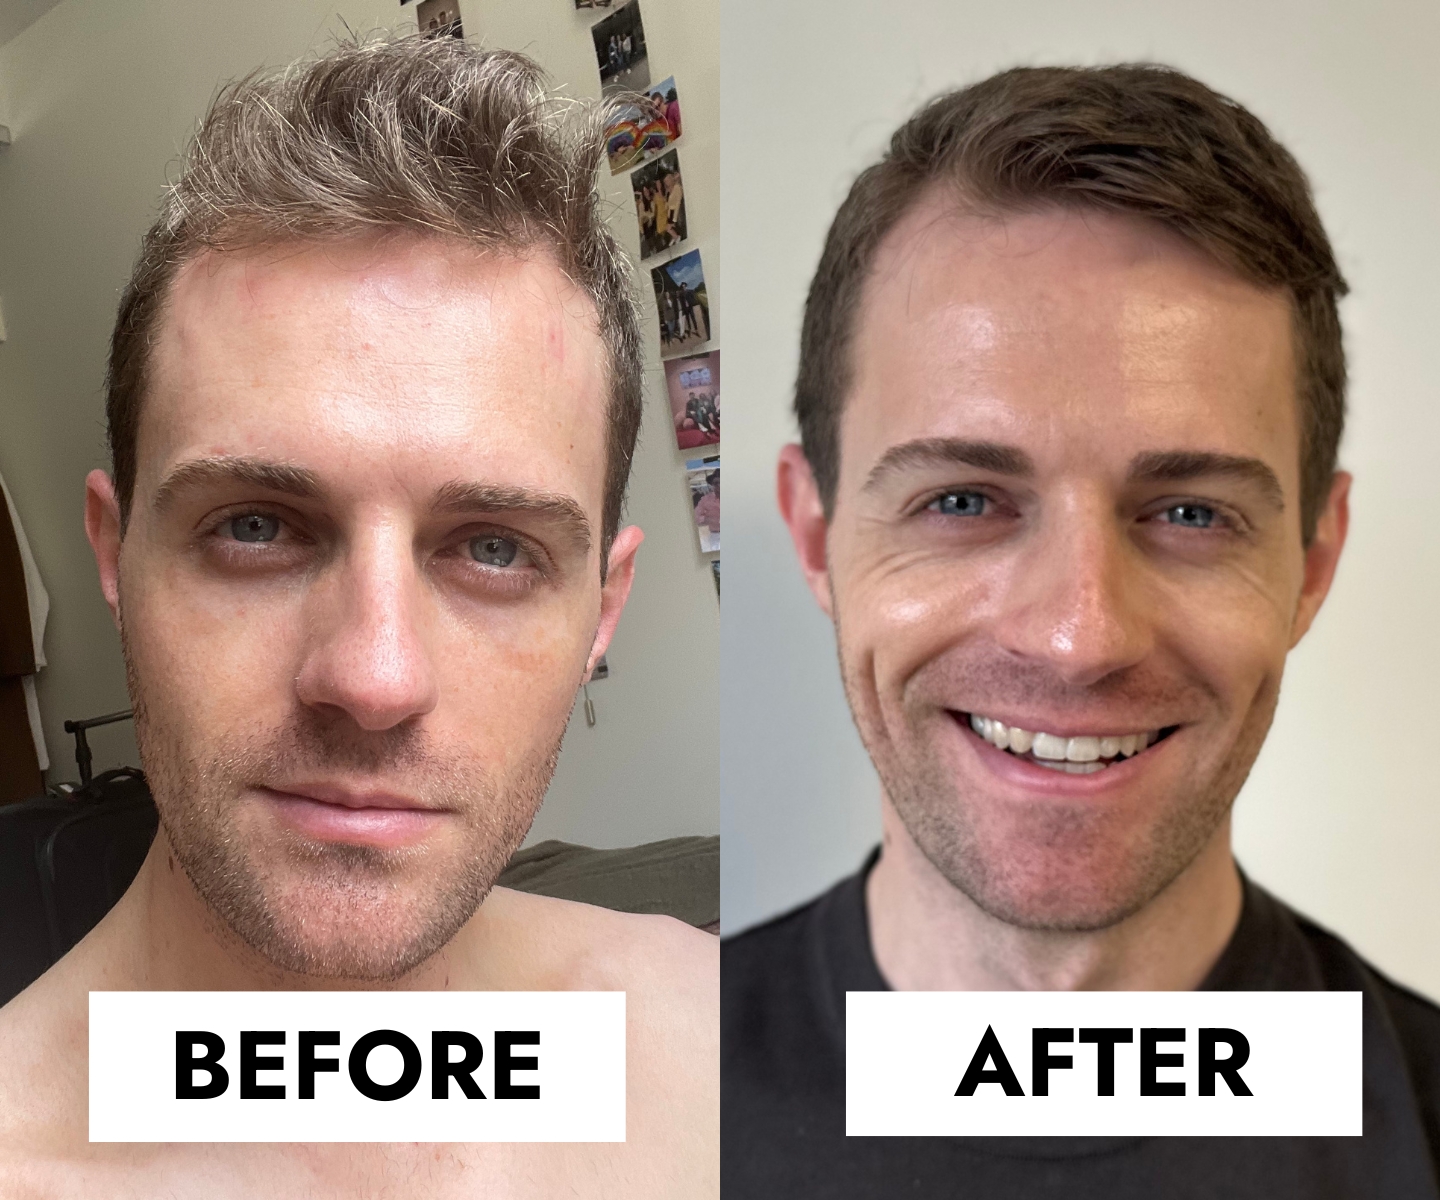 Gerard dewy skin routine before/after in-article